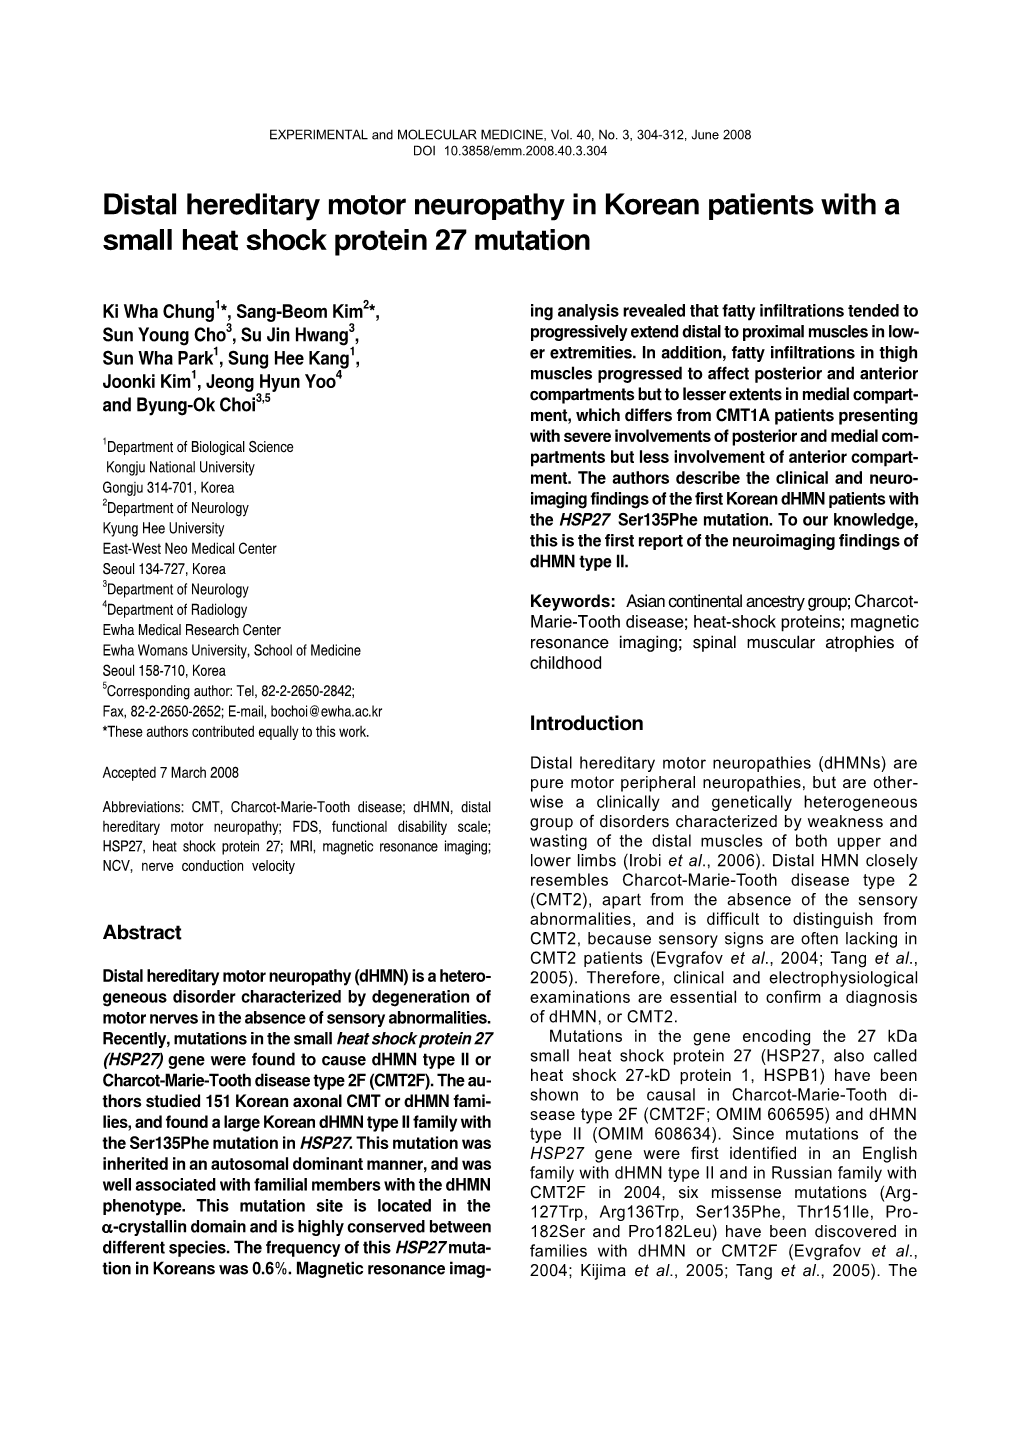 Distal Hereditary Motor Neuropathy in Korean Patients with a Small Heat Shock Protein 27 Mutation